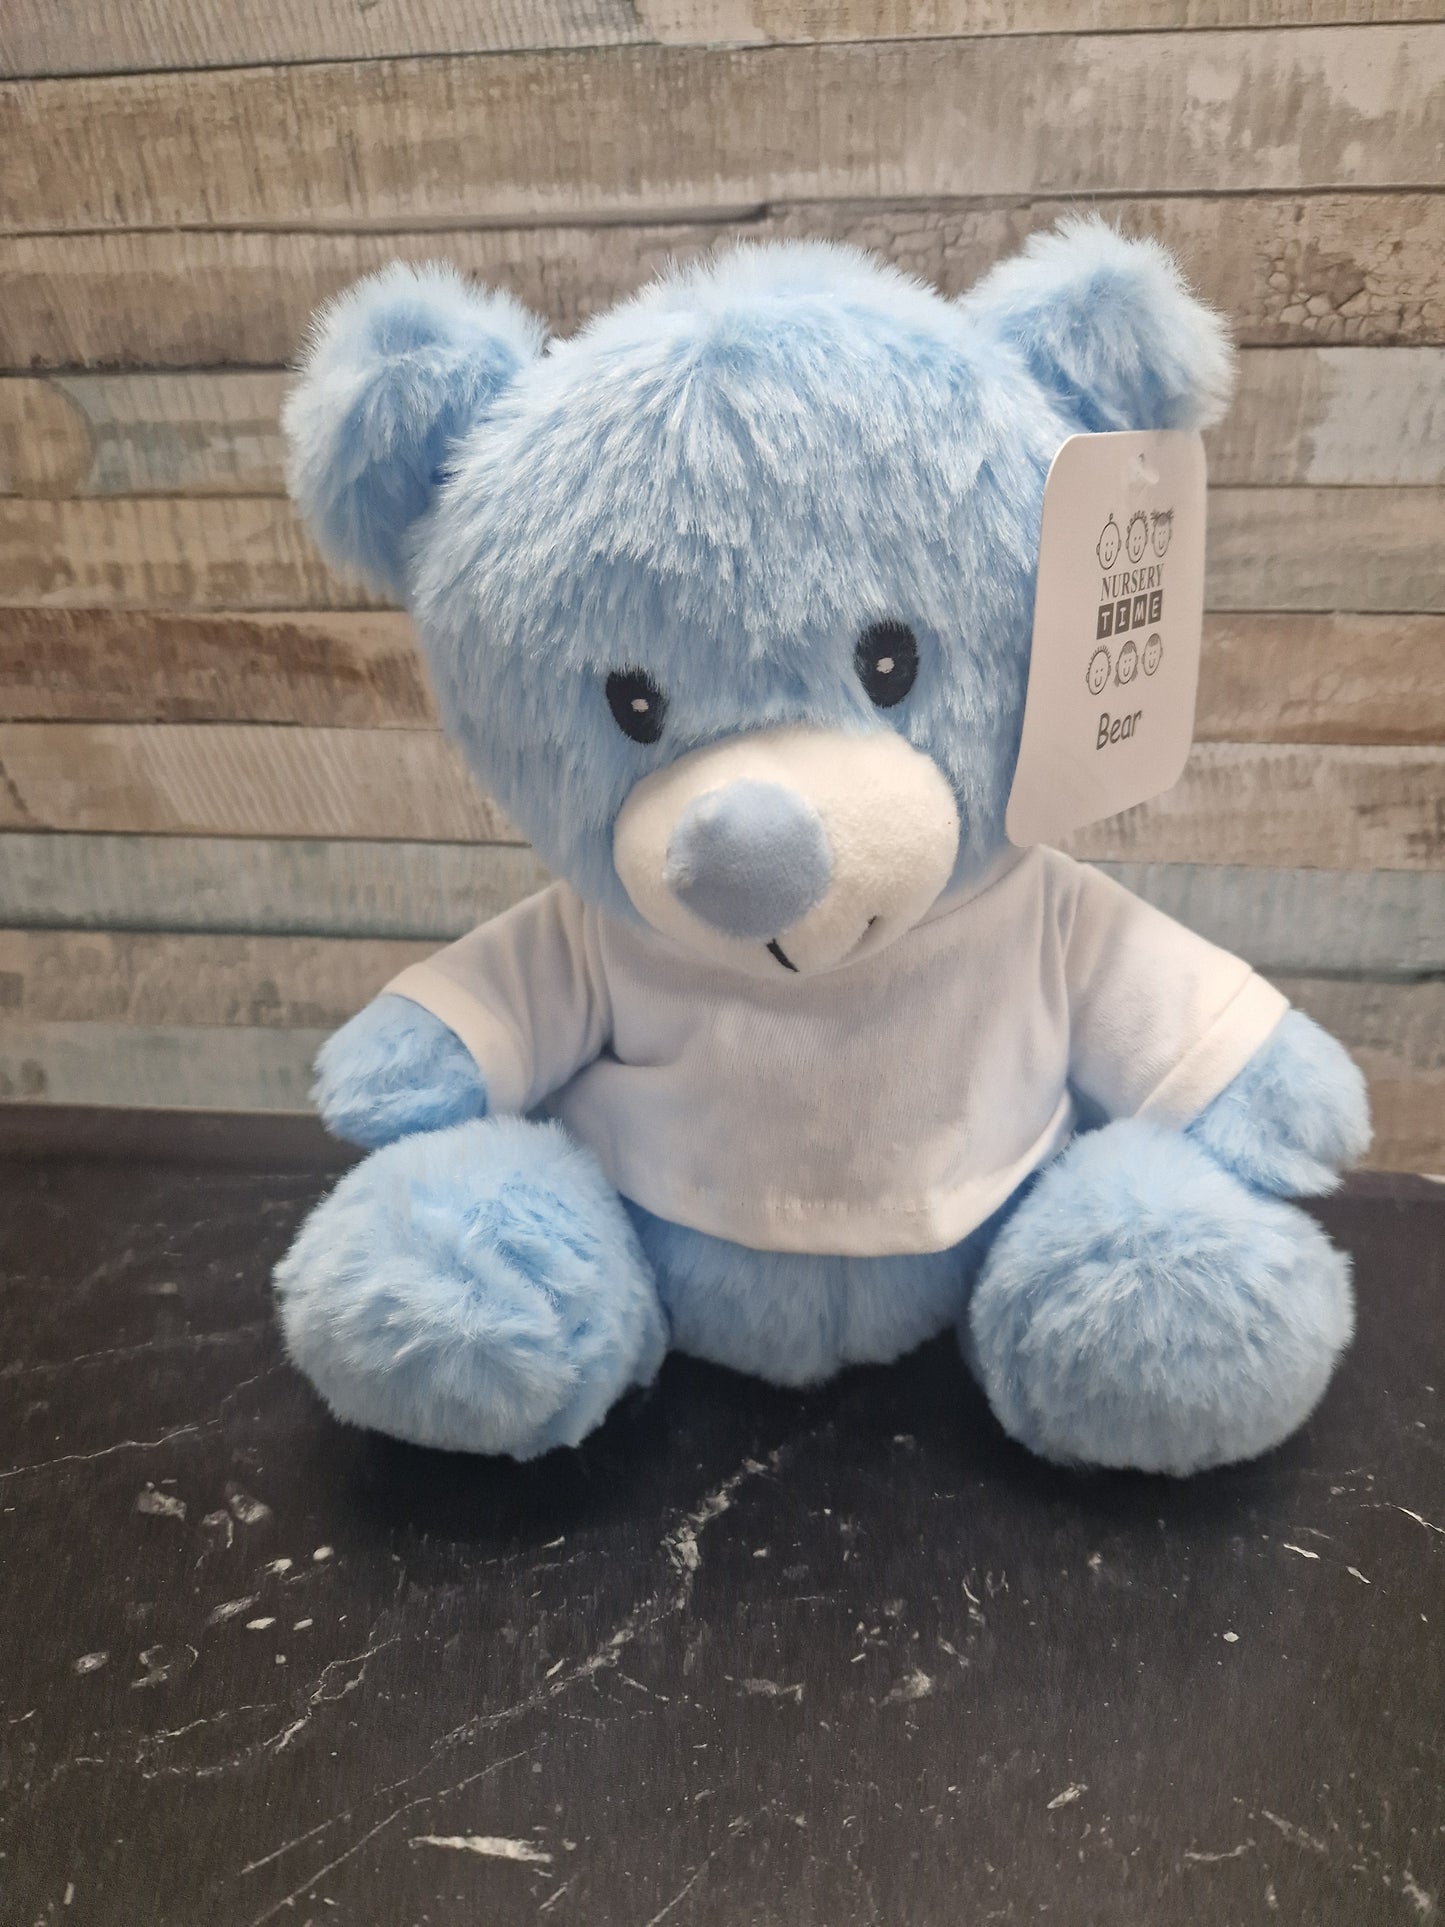 Baby Boys Blue Teddy With Personalised Cotton Jumper